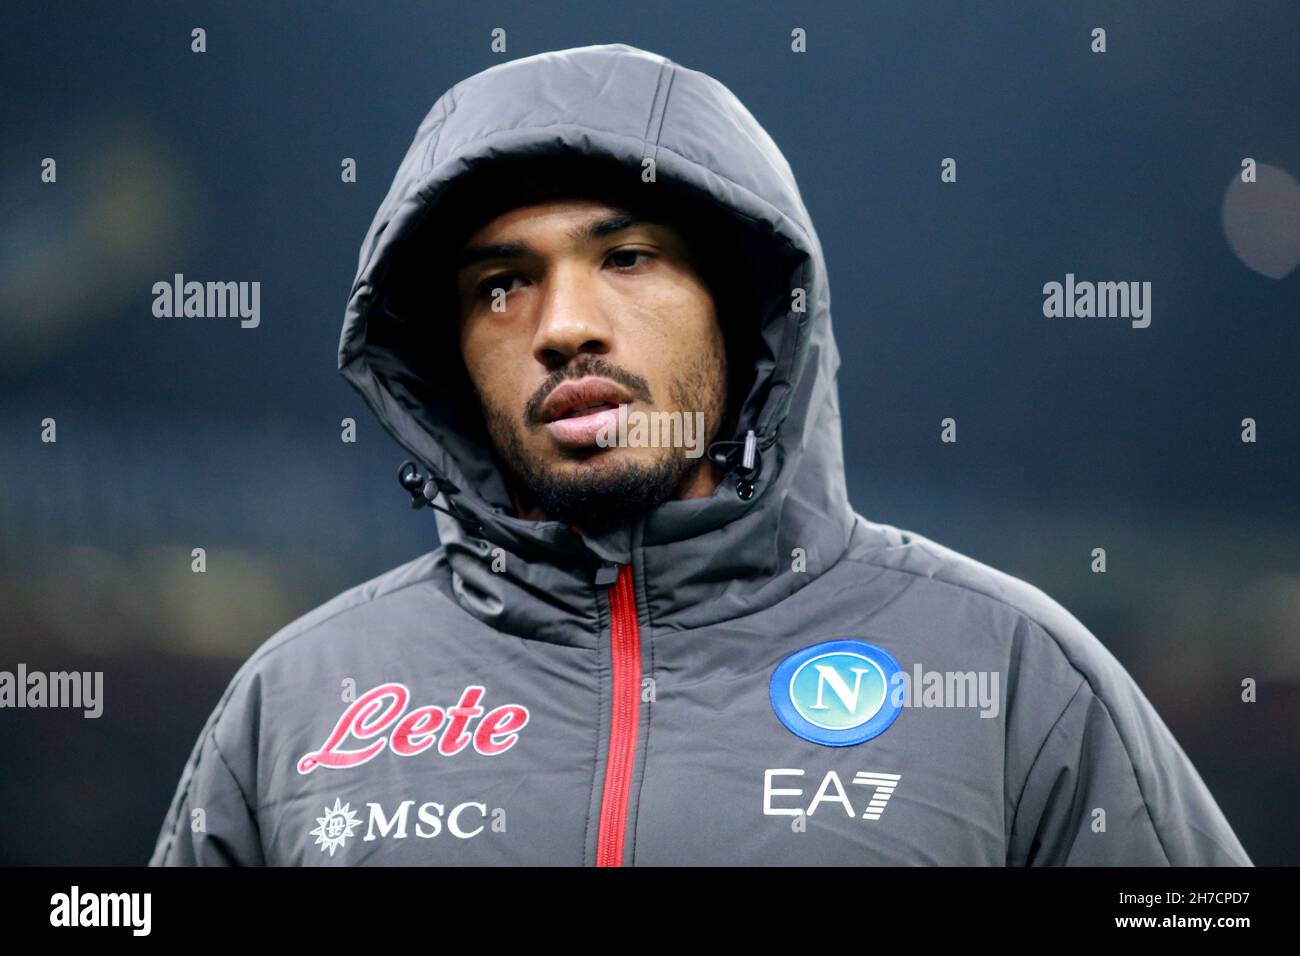 Juan Jesus of Ssc Napoli  during warm up before  the Serie A match between Fc Internazionale and Ssc Napoli Stock Photo